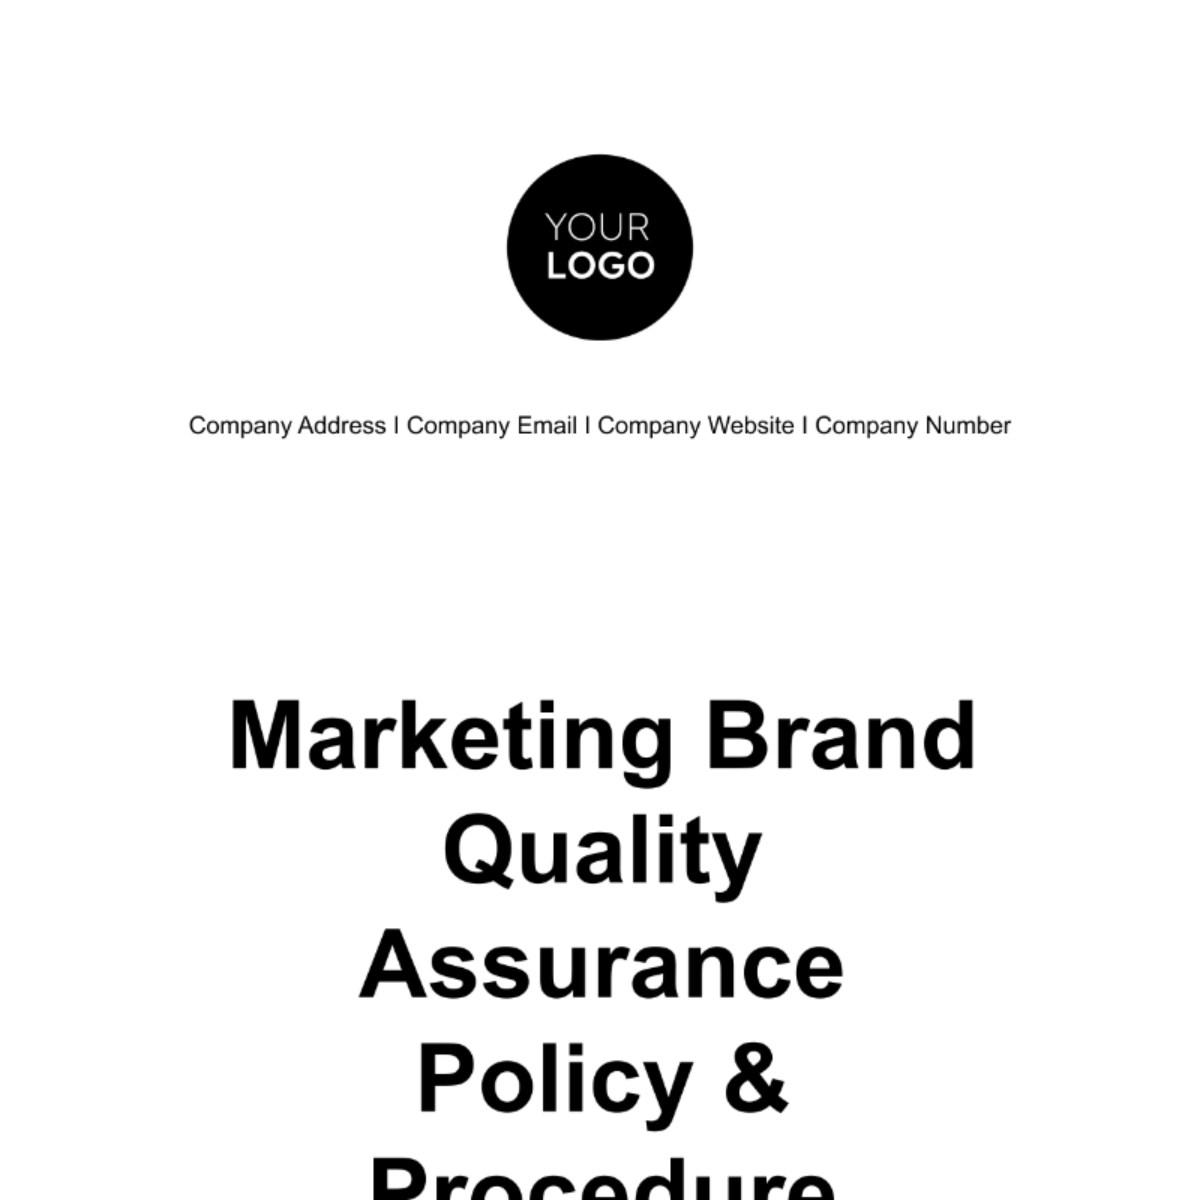 Marketing Brand Quality Assurance Policy & Procedure Template